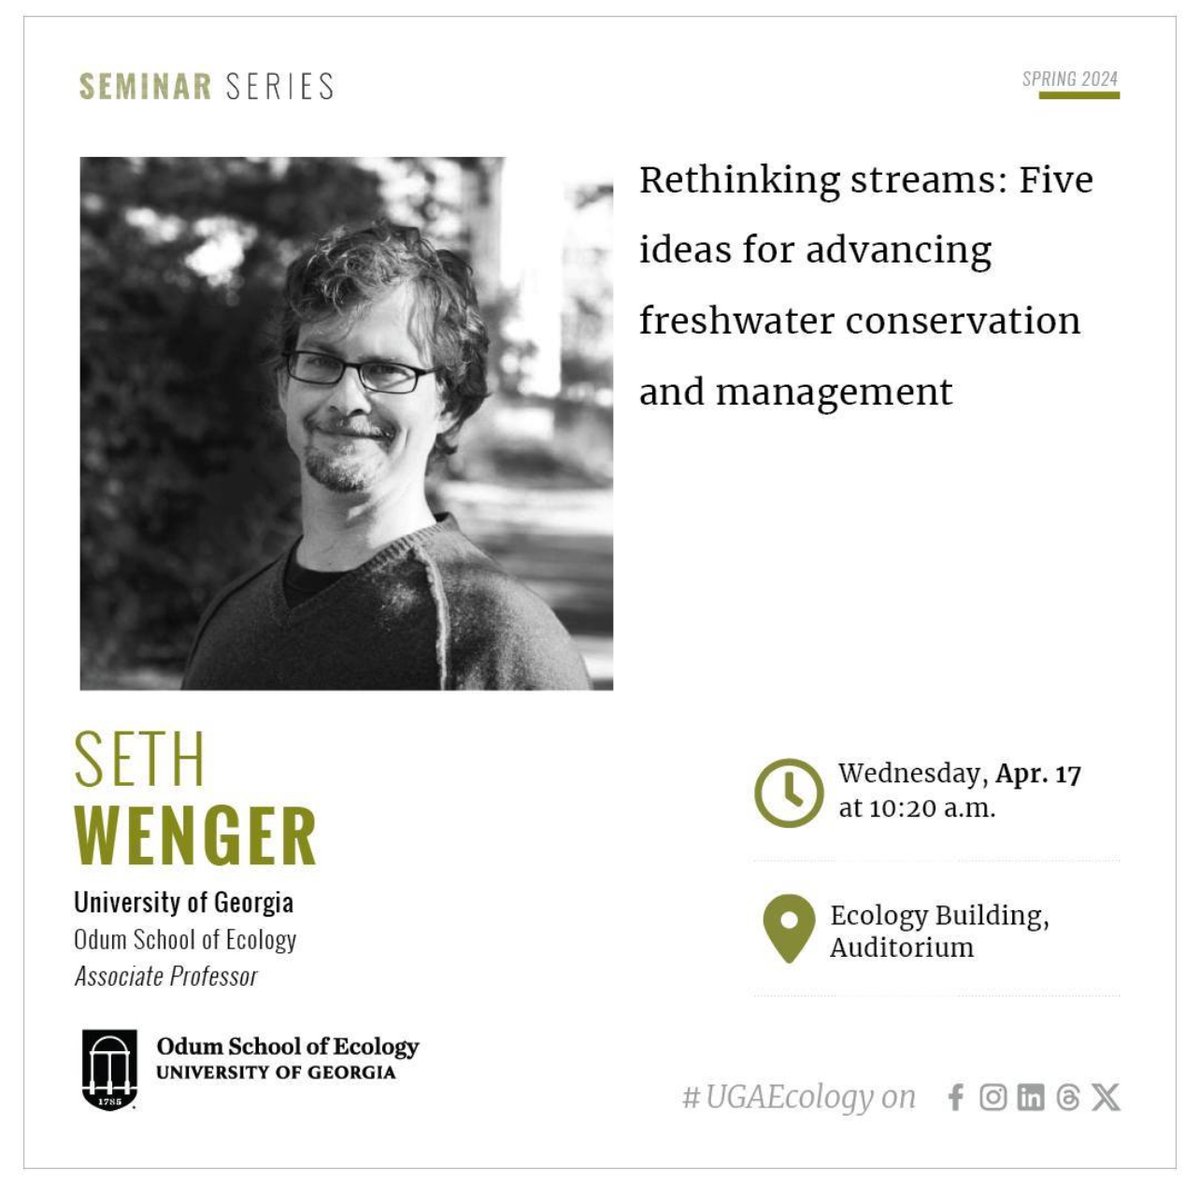 Come see our River Basin Center director of science Seth Wenger give his talk titled “Rethinking streams: five ideas for advancing freshwater conservation and management” today at 10:20 AM in the Ecology building auditorium!